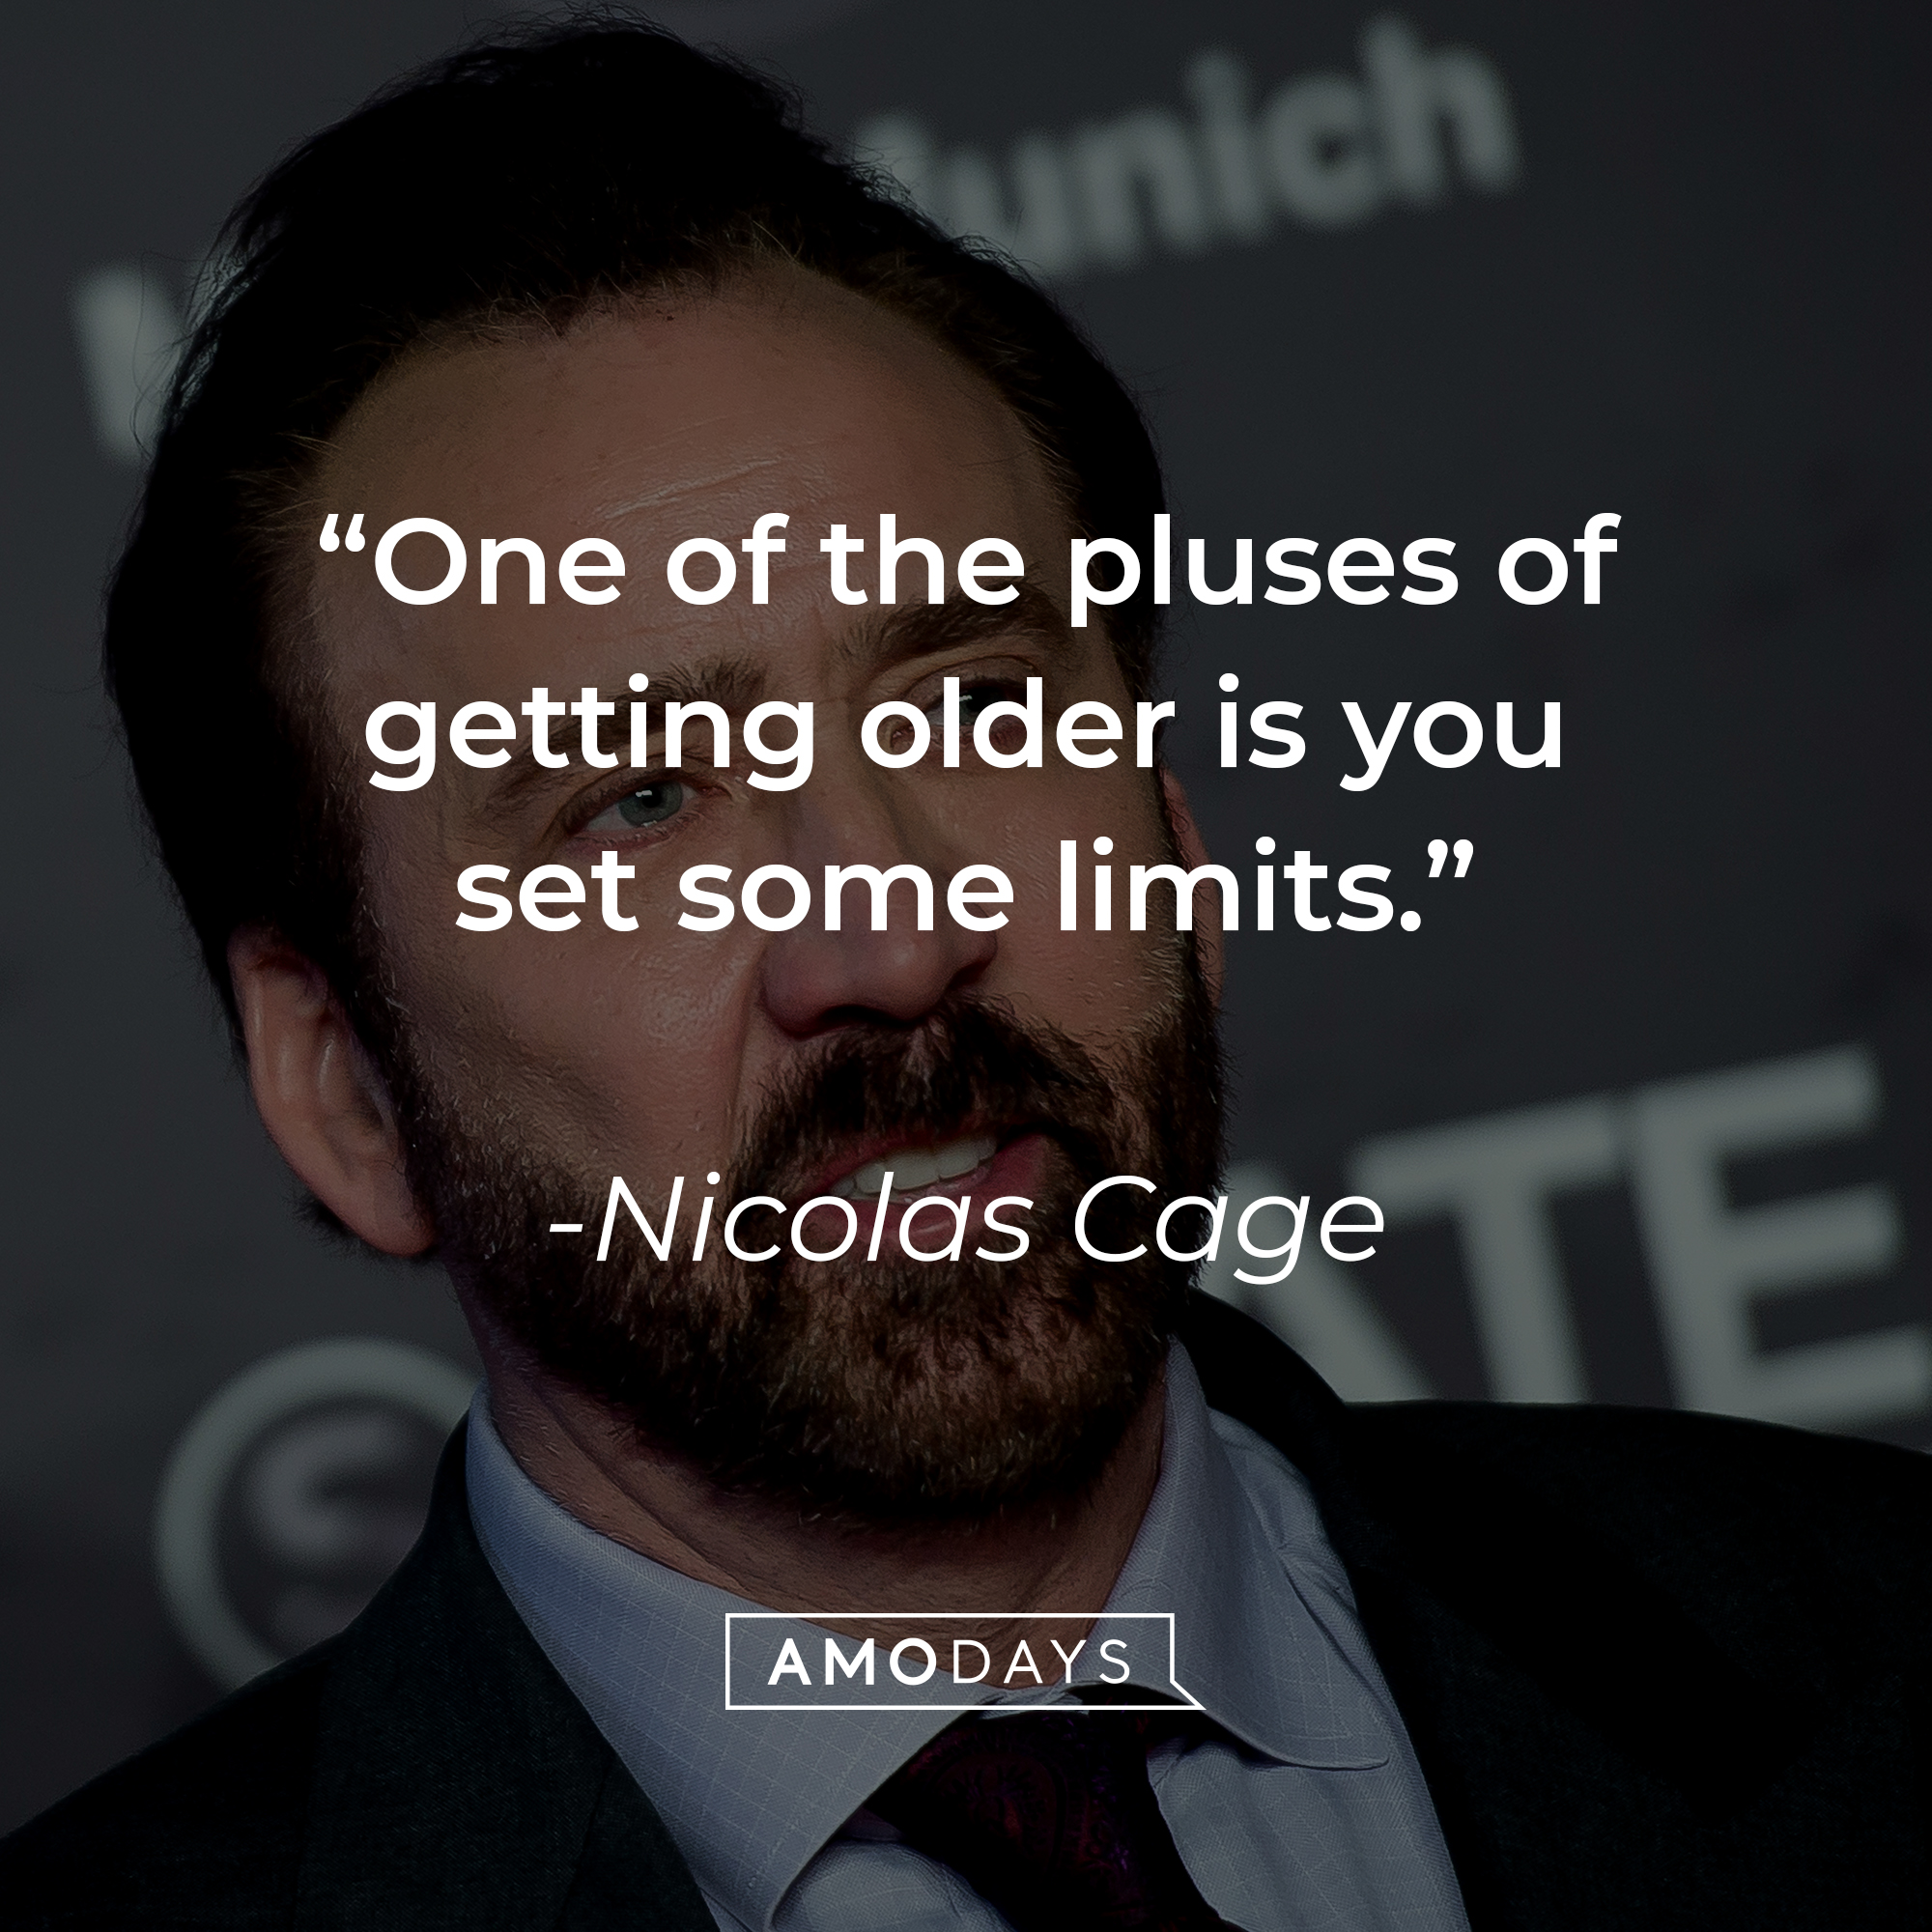 Nicolas Cage's quote: "One of the pluses of getting older is you set some limits." | Source: Getty Images